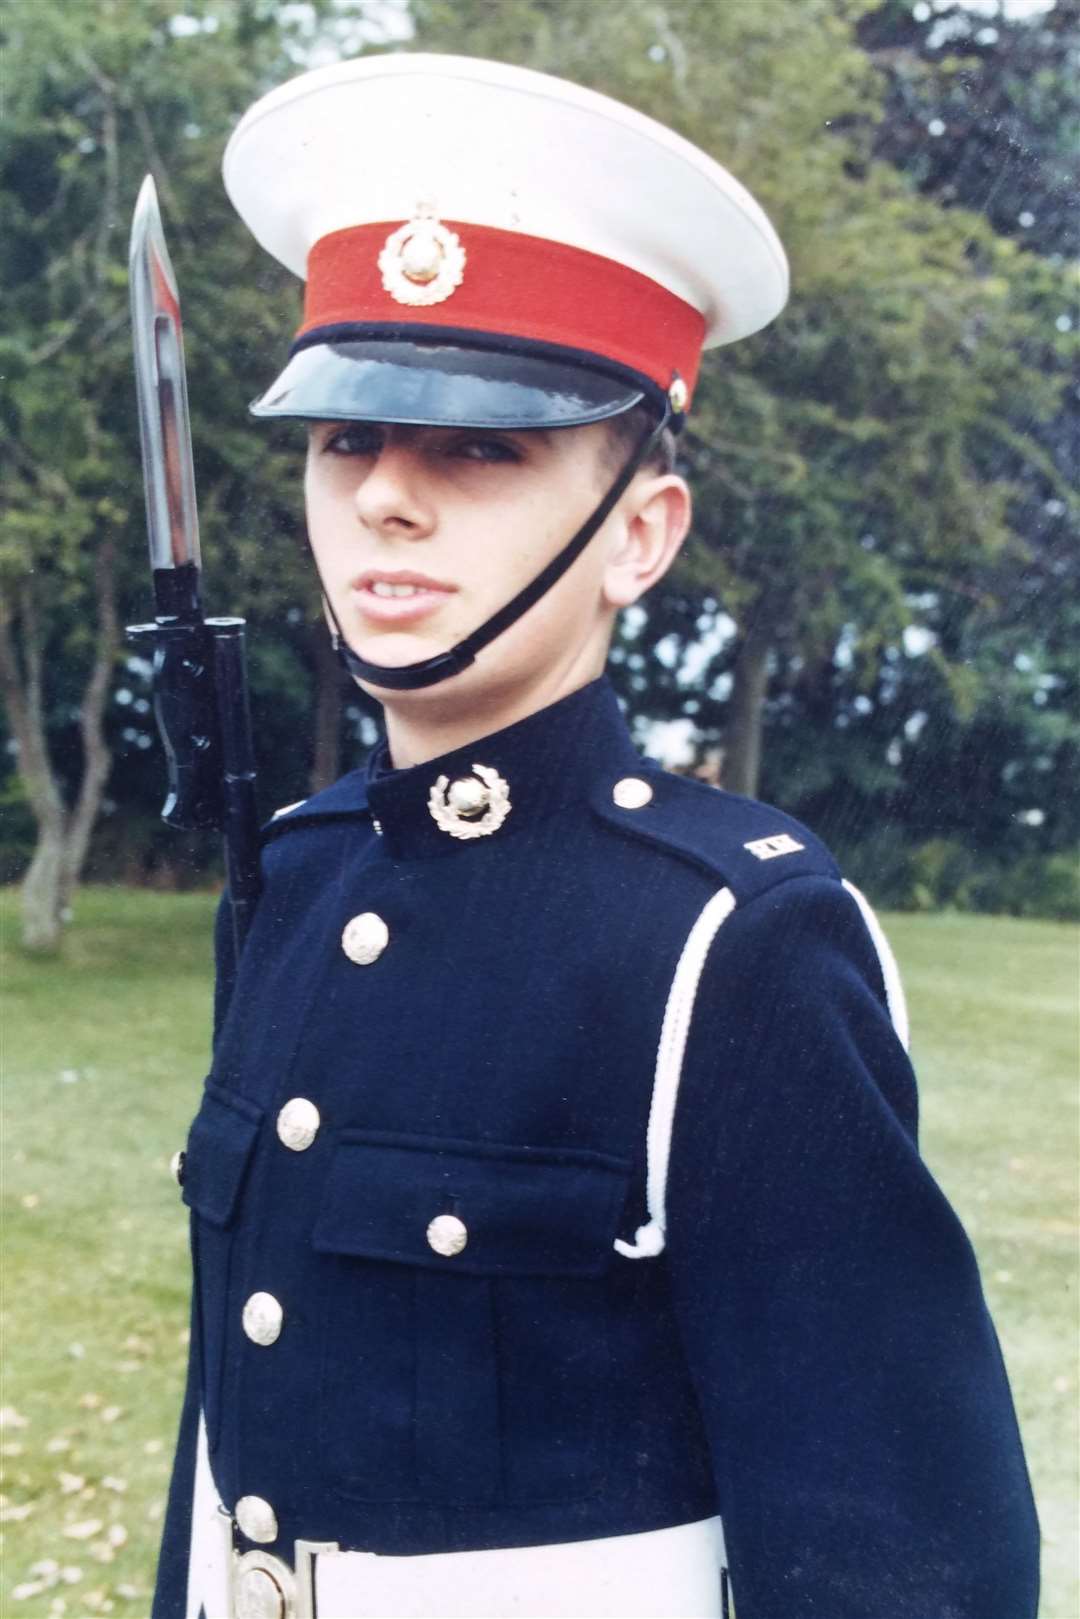 Ronnie in 1978 at the Royal Marines commando training centre in Exmouth, Devon.